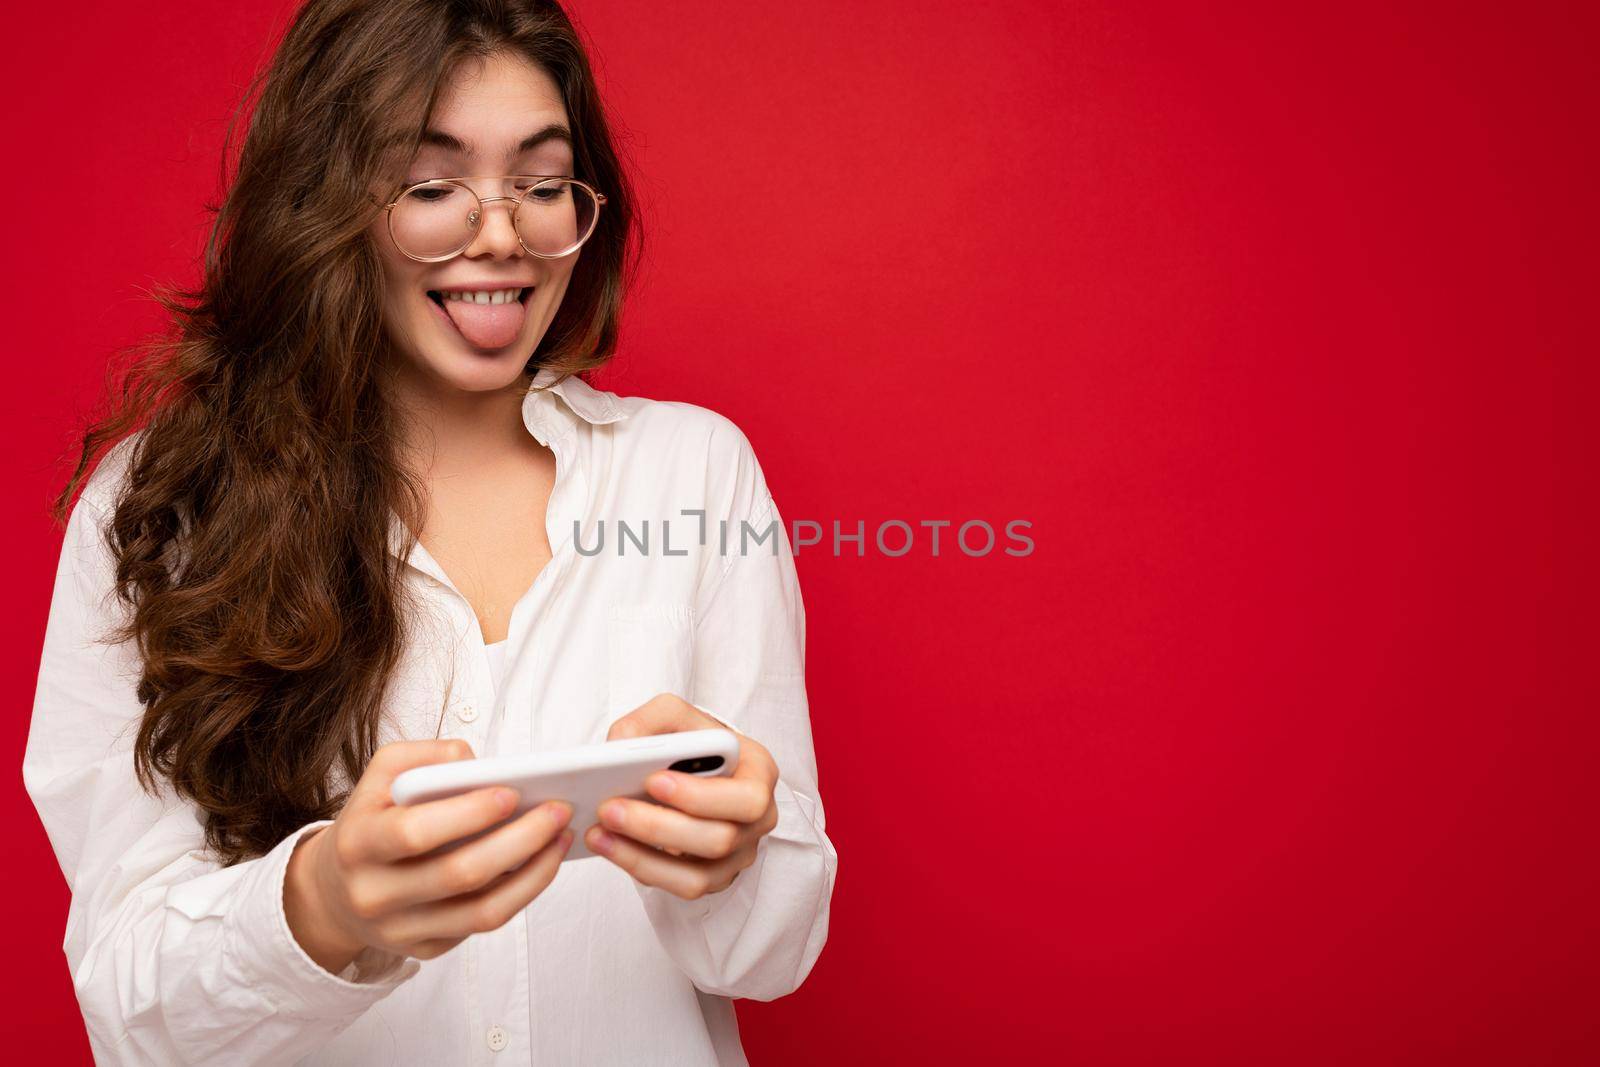 Portrait photo of Pretty smiling positive young brunette woman wearing white shirt and optical glasses isolated over red background holding in hand and using mobile phone playing online games looking at gadjet display and showing tongue.